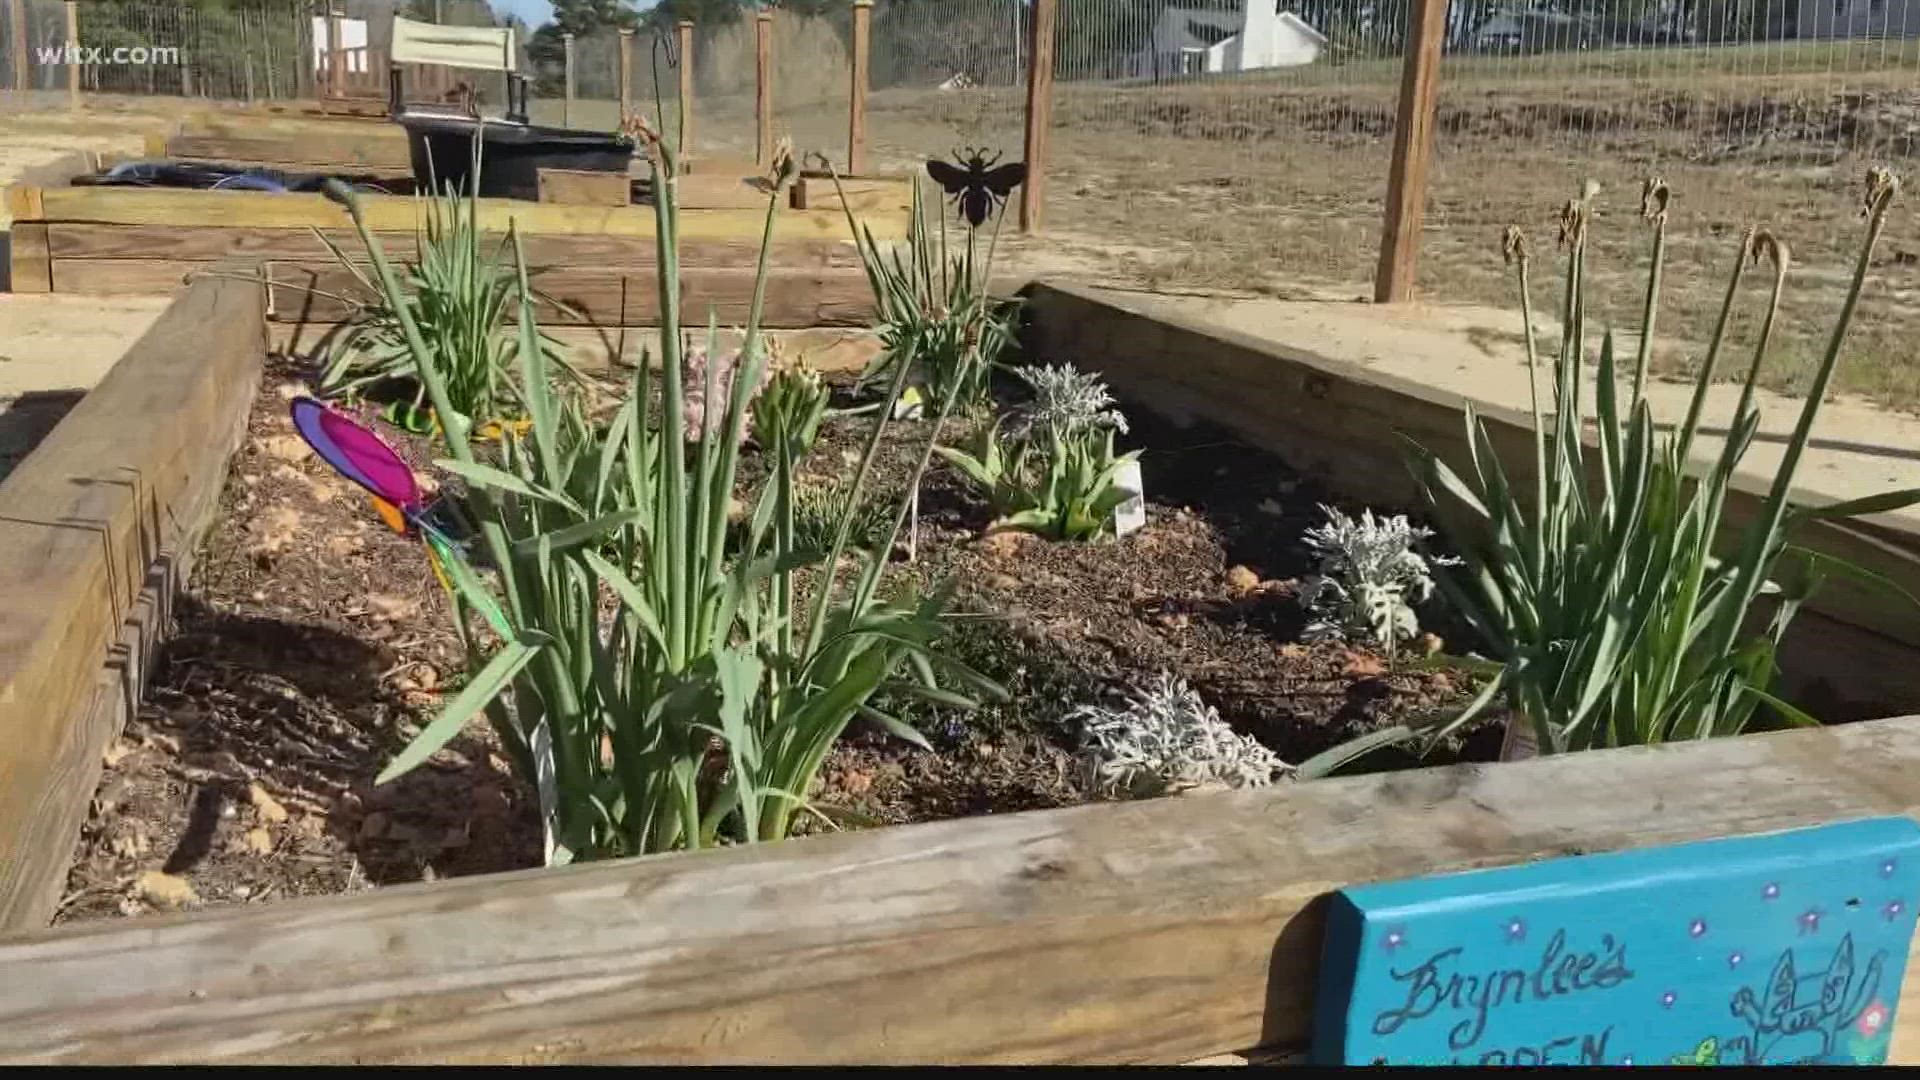 The United Way of Kershaw County and members of the community are building a community garden to help feed families in the area.